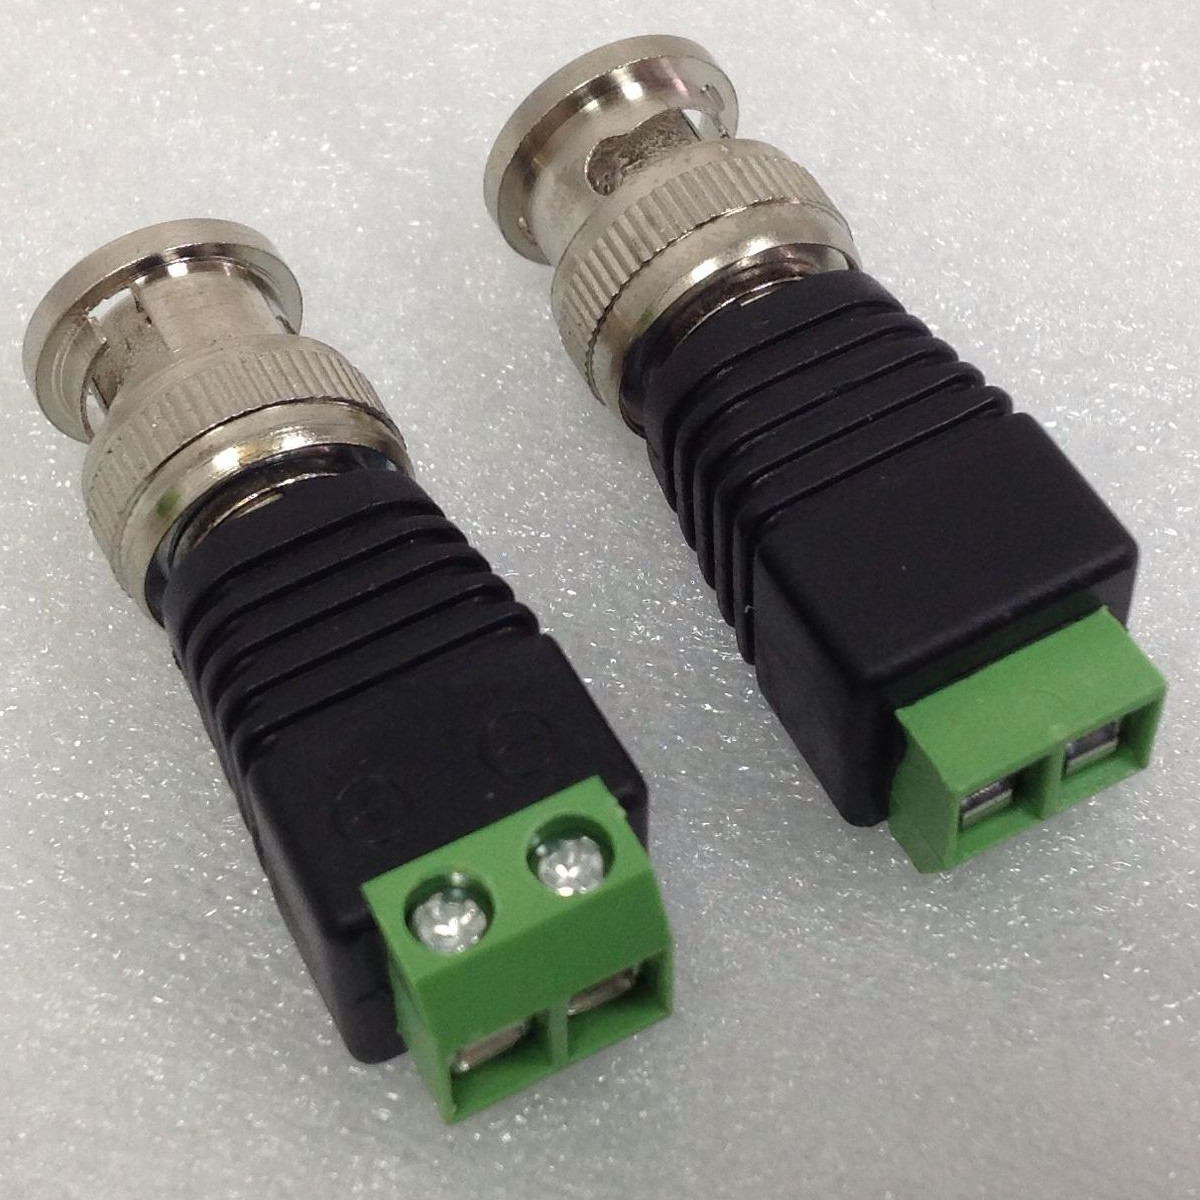 t 1 connector